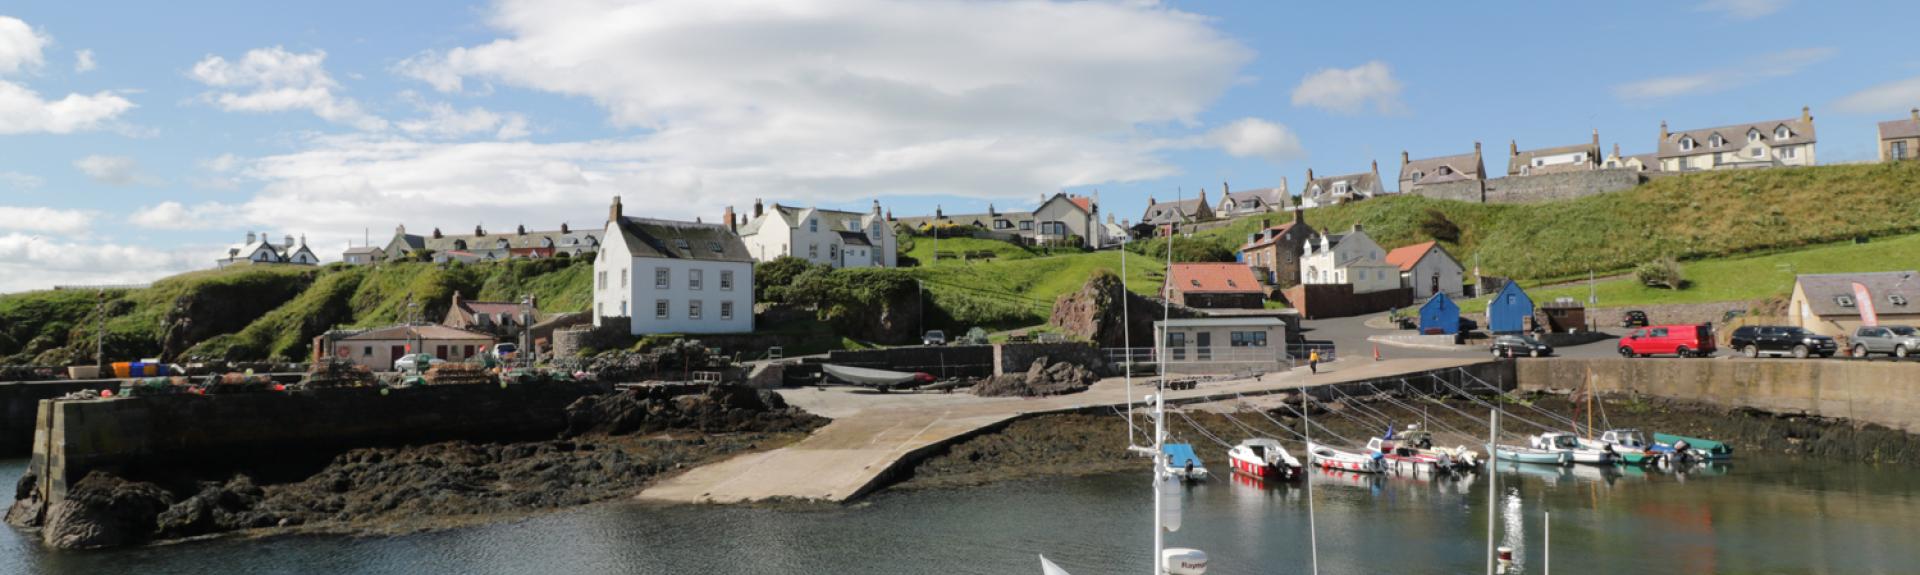 Small craft and fishing boats are moored to a quayside in St. Abbs, with village builldings in the backfround.